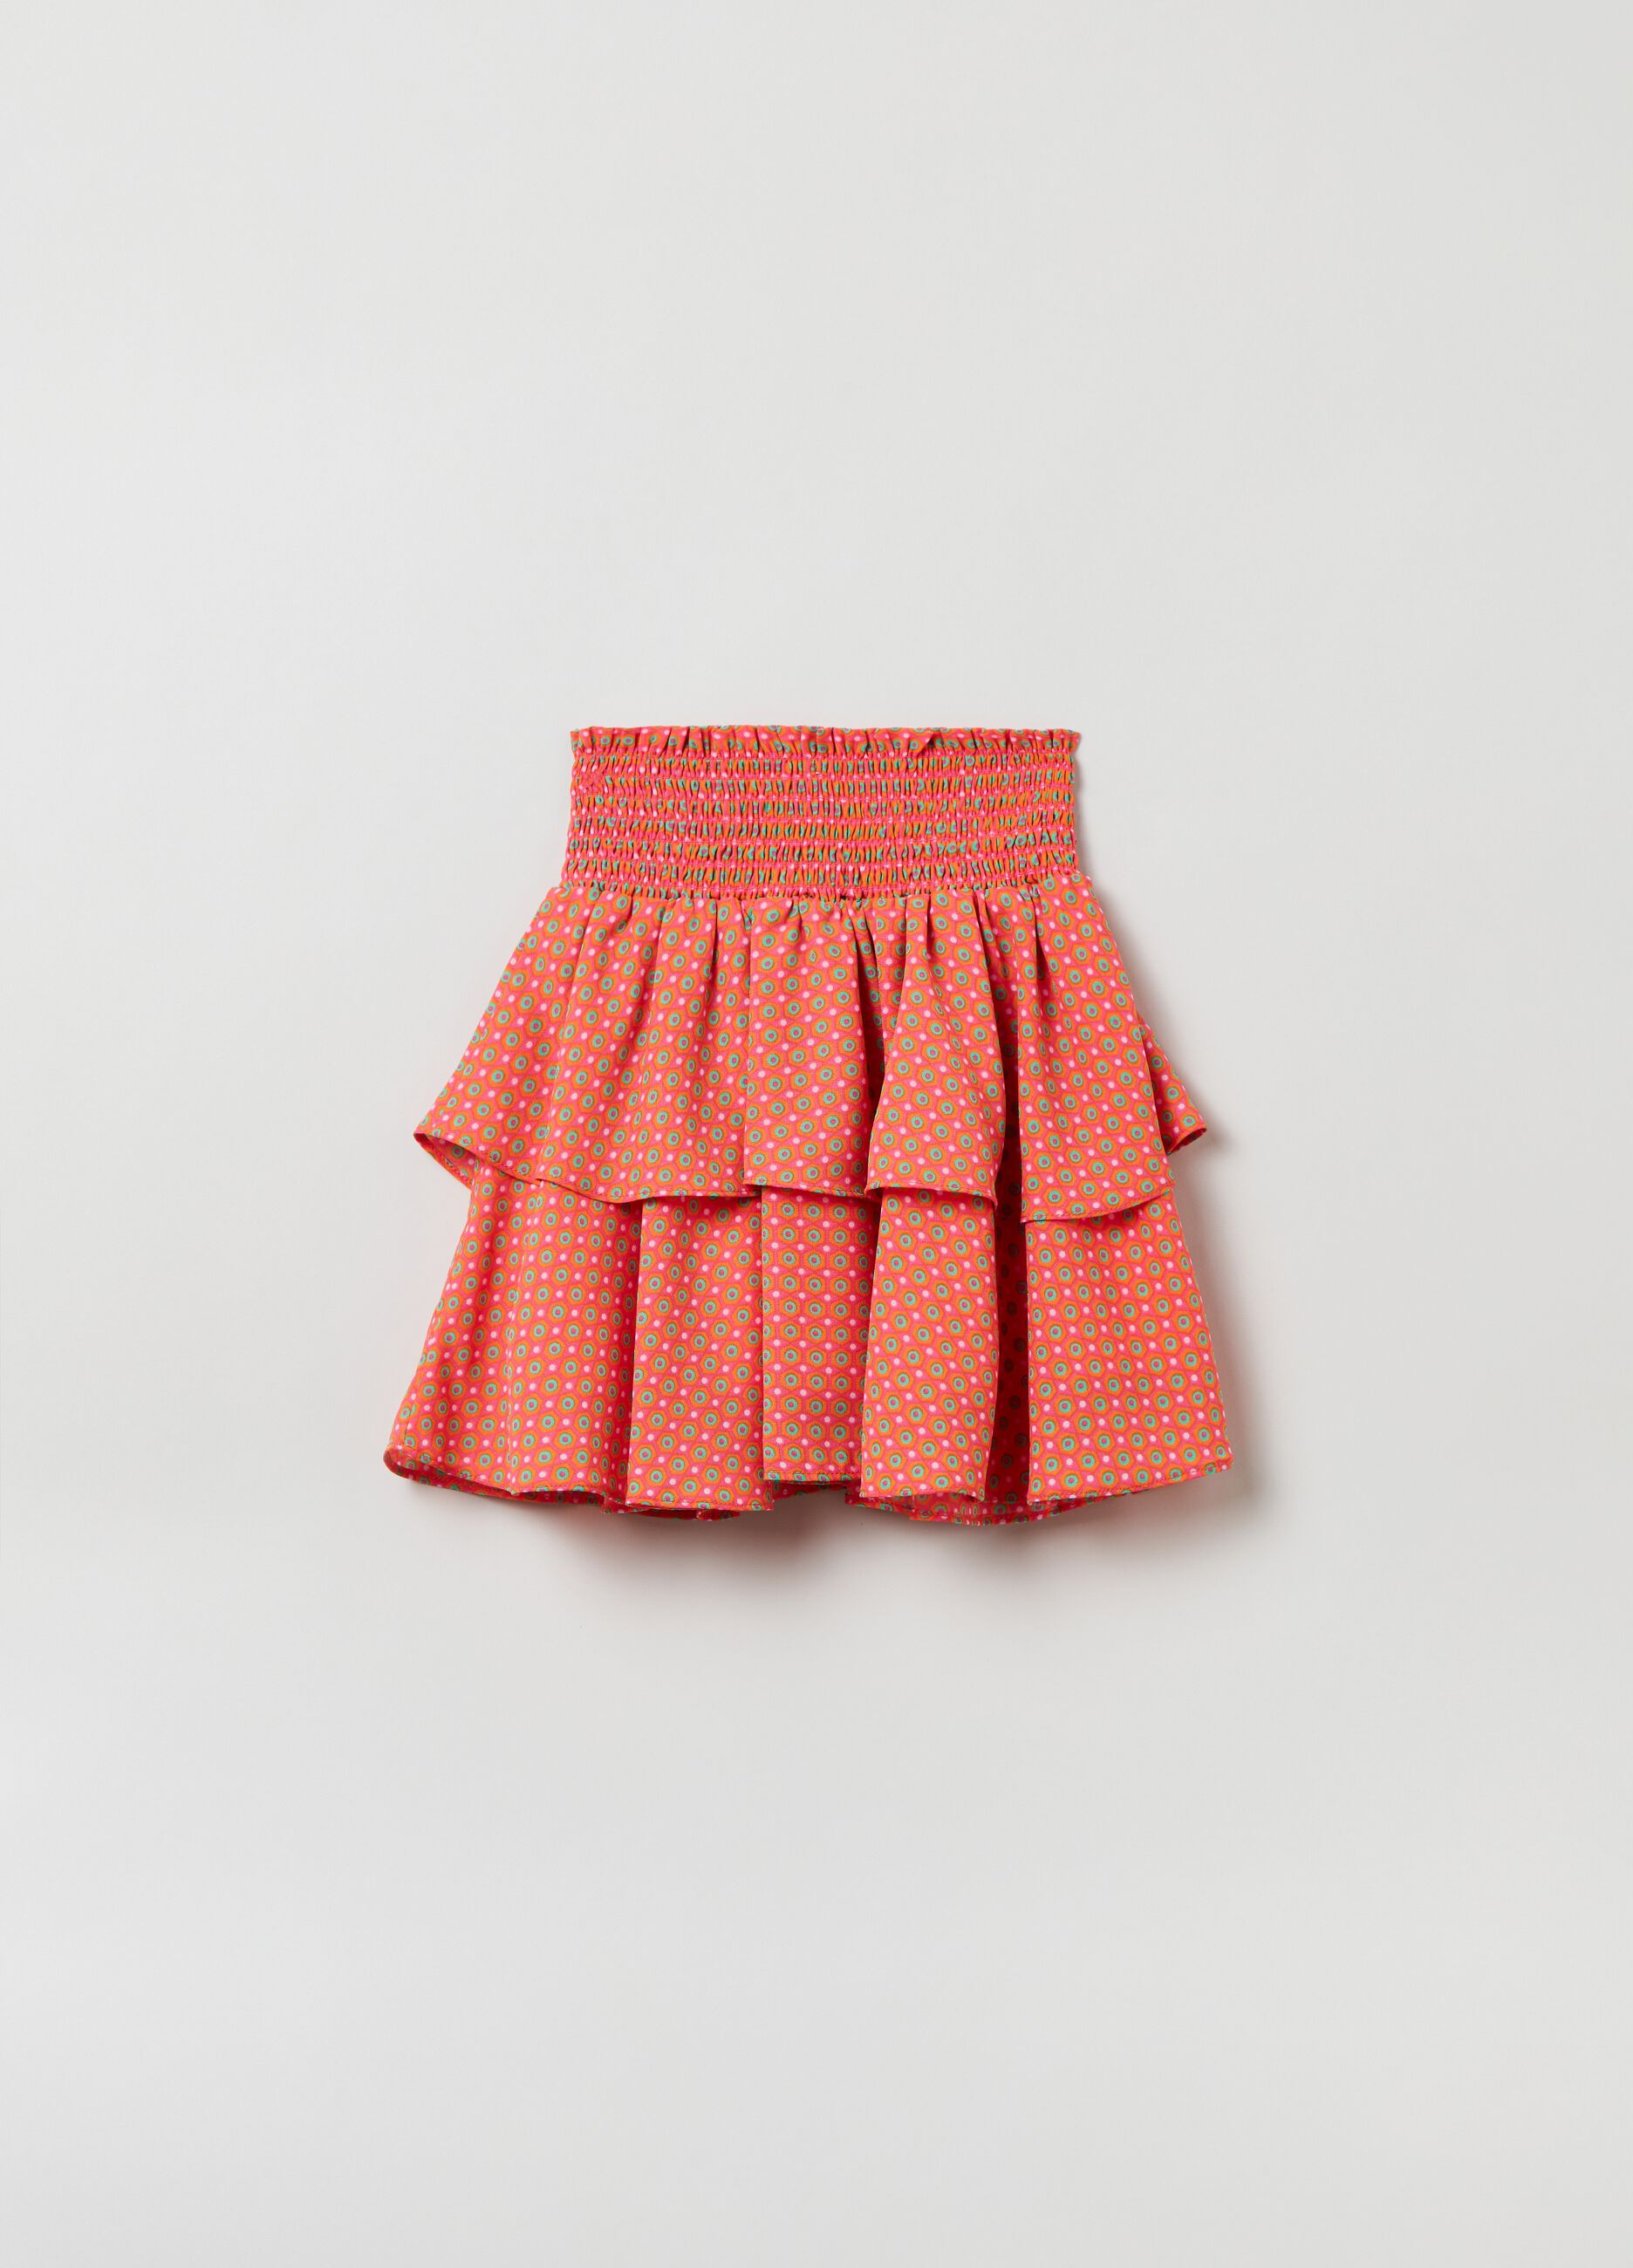 Tiered skirt with geometric print